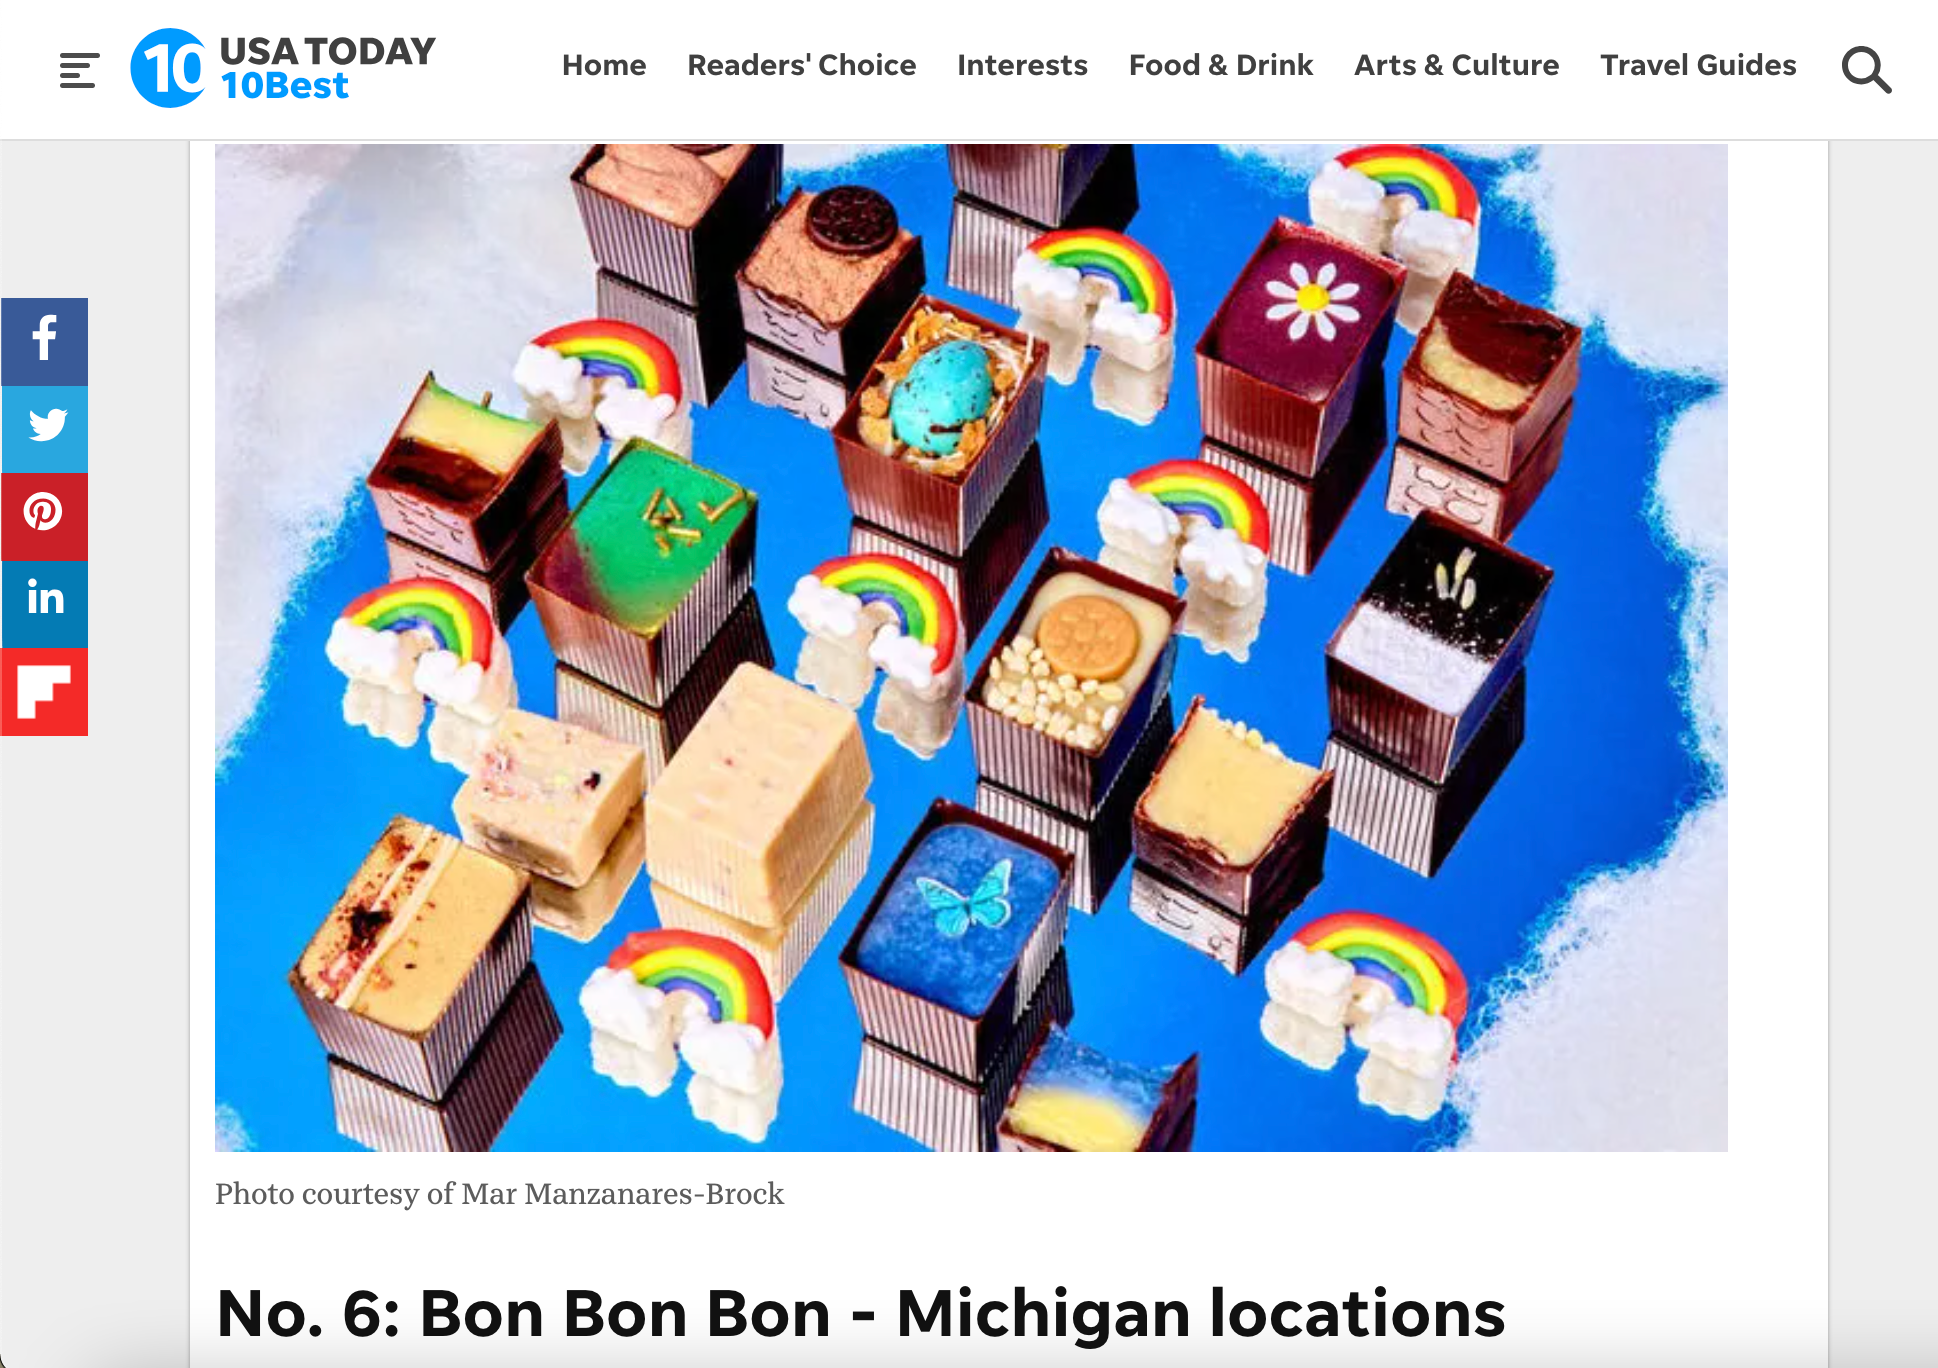 Bon Bon Bon ranked 6th among 10 Best Chocolate Shops in the USA by 10 Best USA Today